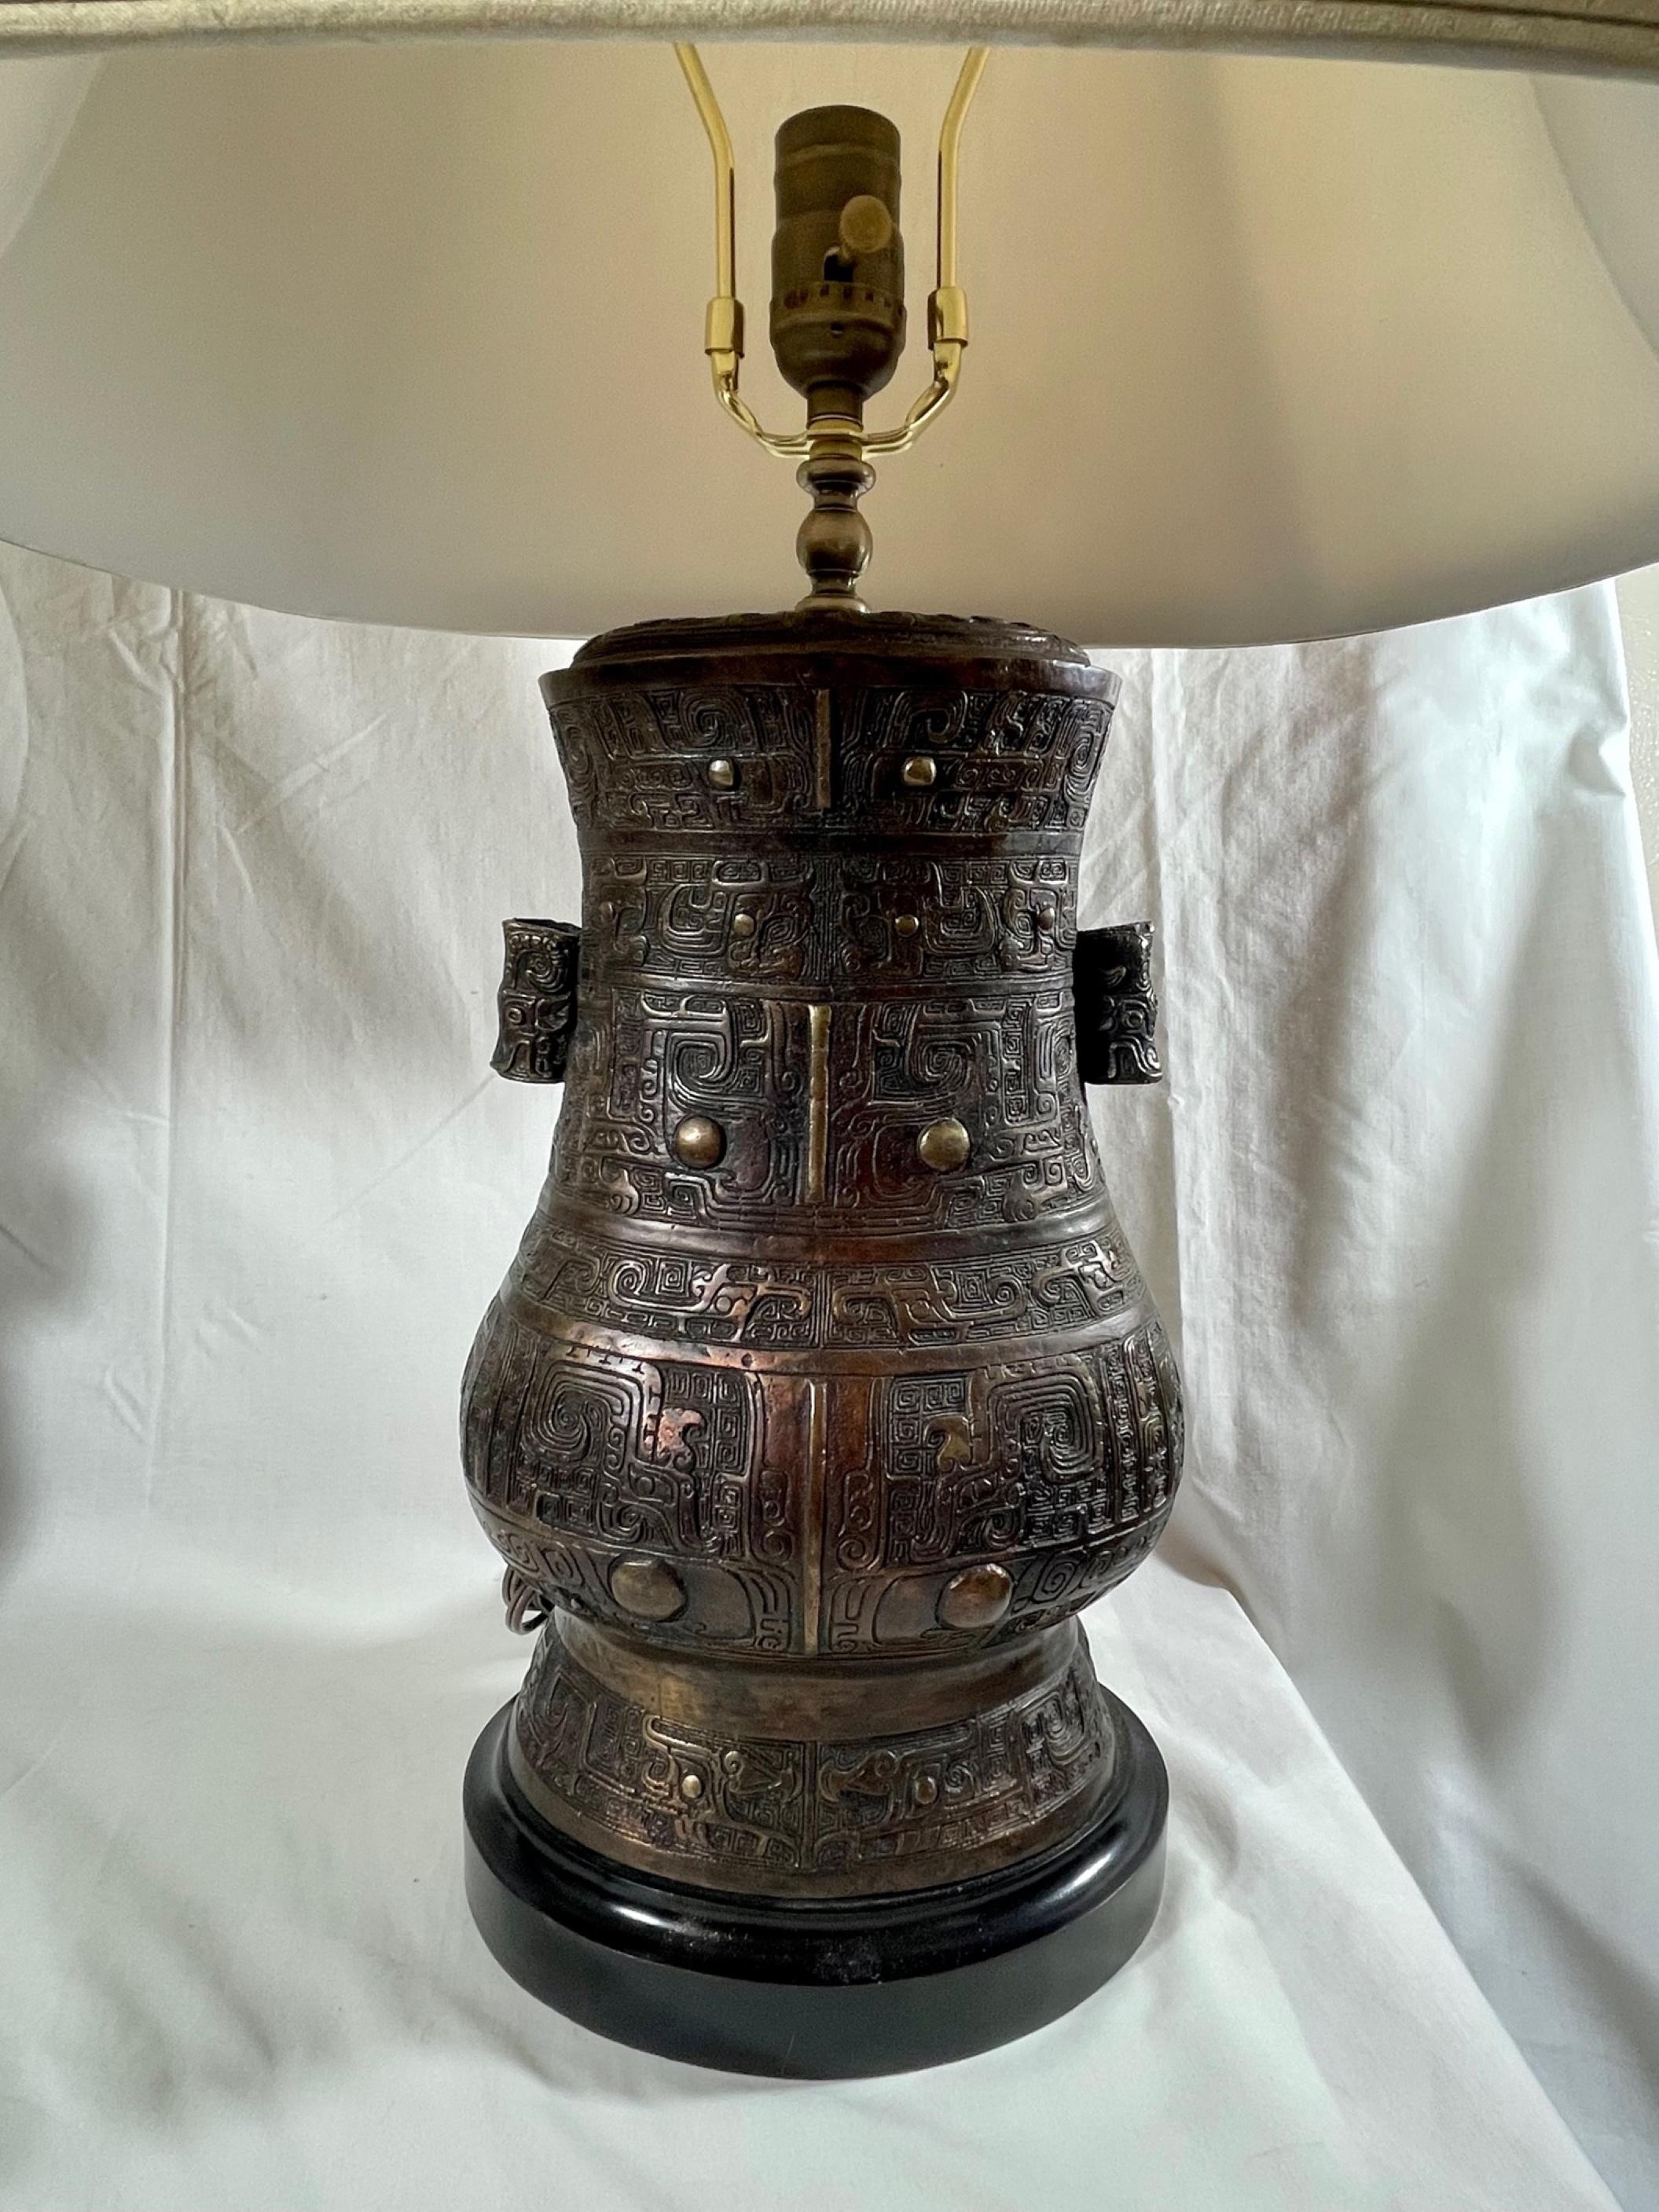 Large Pair Chinese Archaistic style lidded bronze vases - Urn lamps

Beautiful matching pair of bronze cast early 20th century Chinese vases in the archaic style. The lidded heavy bronze urns are cast by master craftsmen in extraordinary quality.